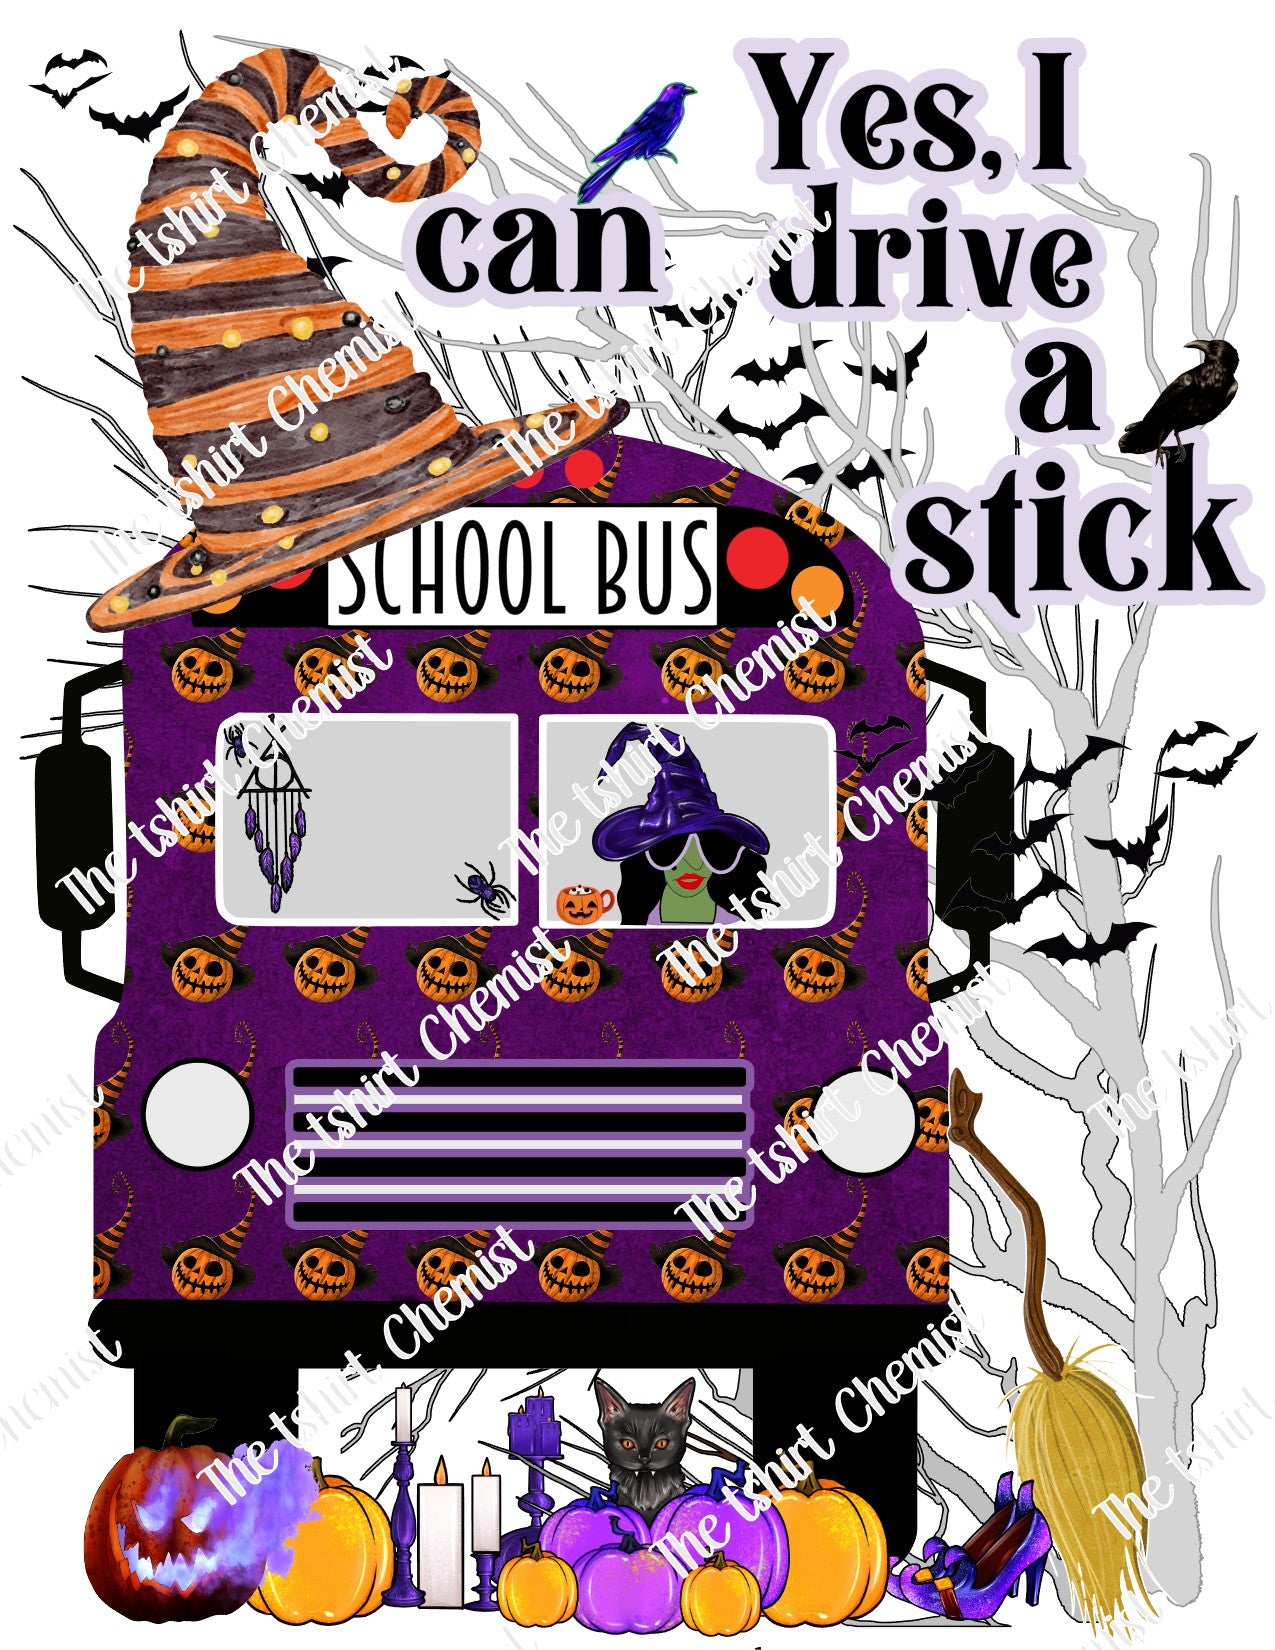 Halloween School Bus, Yes I can drive a Stick